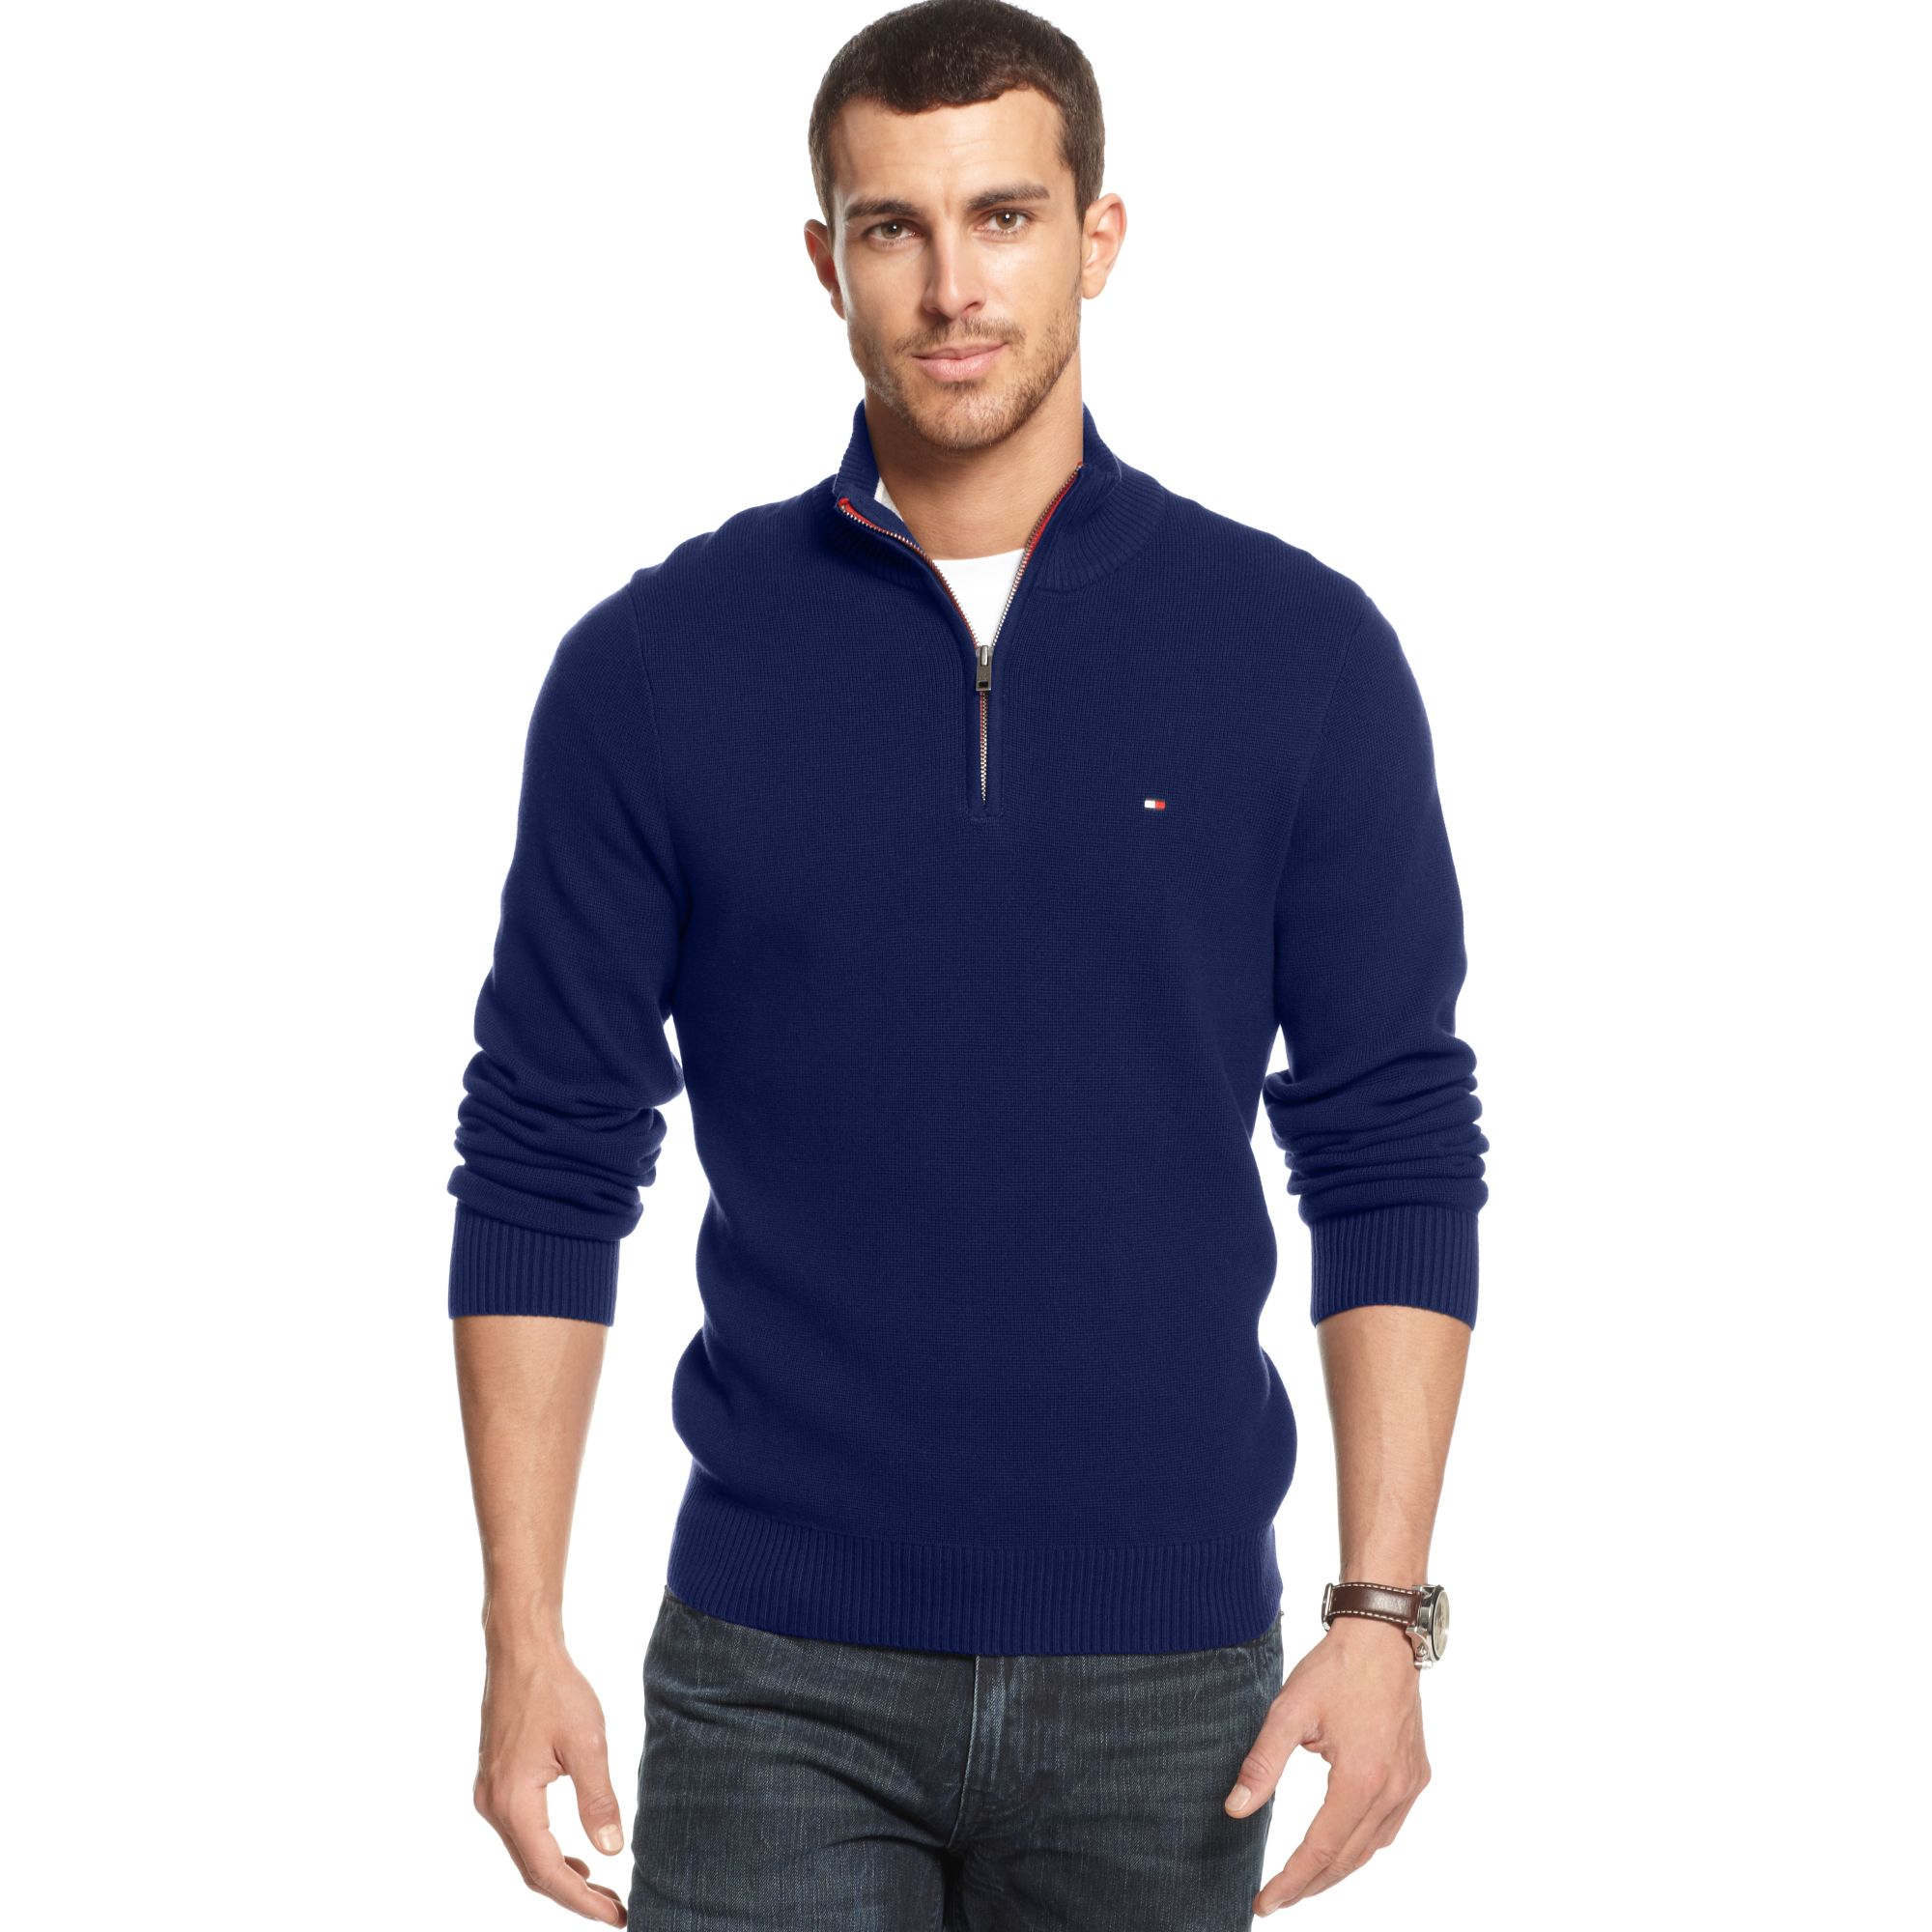 Lyst - Tommy Hilfiger Zip Up Sweater in Blue for Men